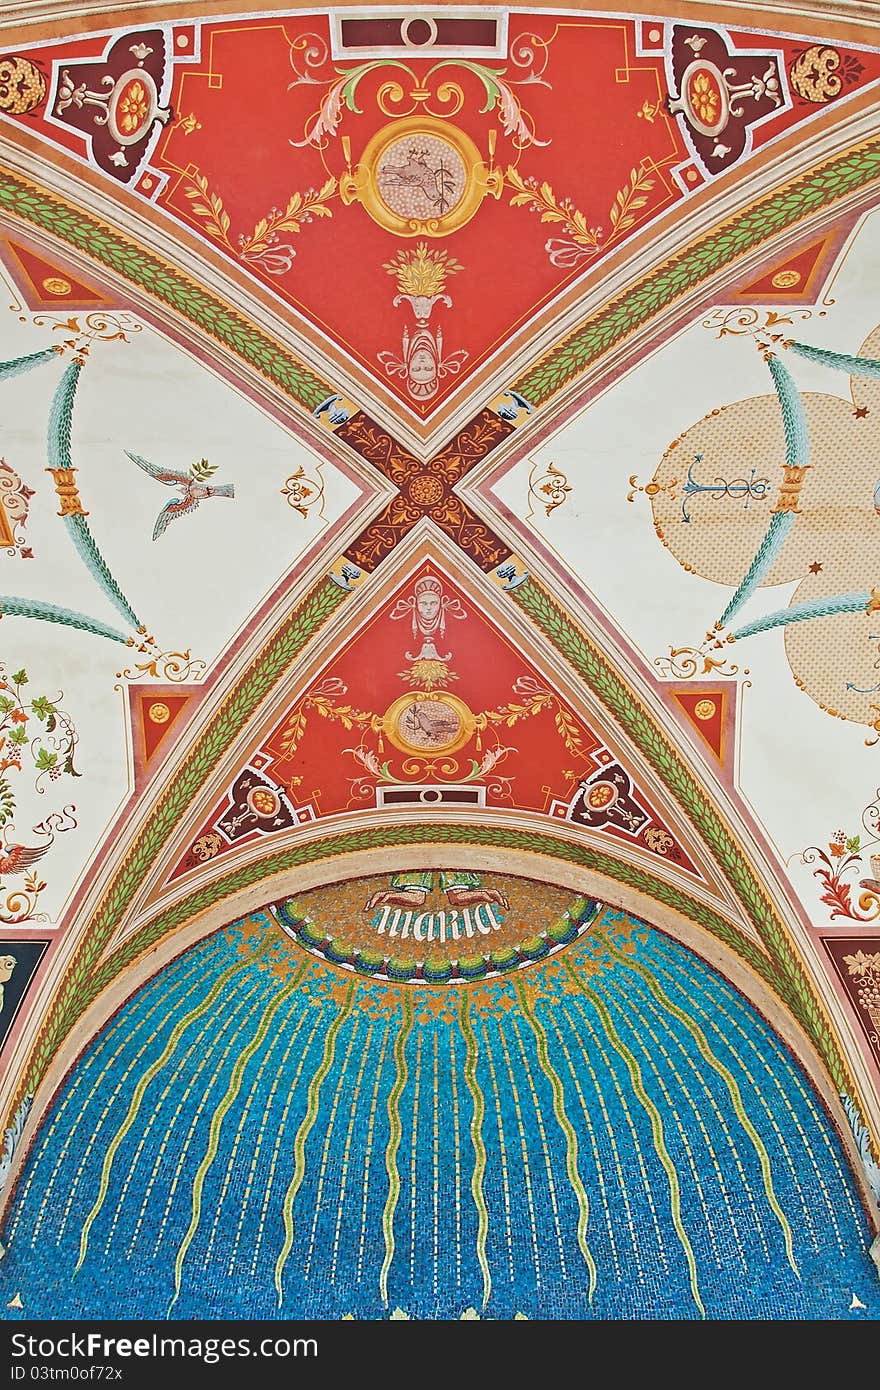 Old colorful ceiling with a blue mosaic of stones.